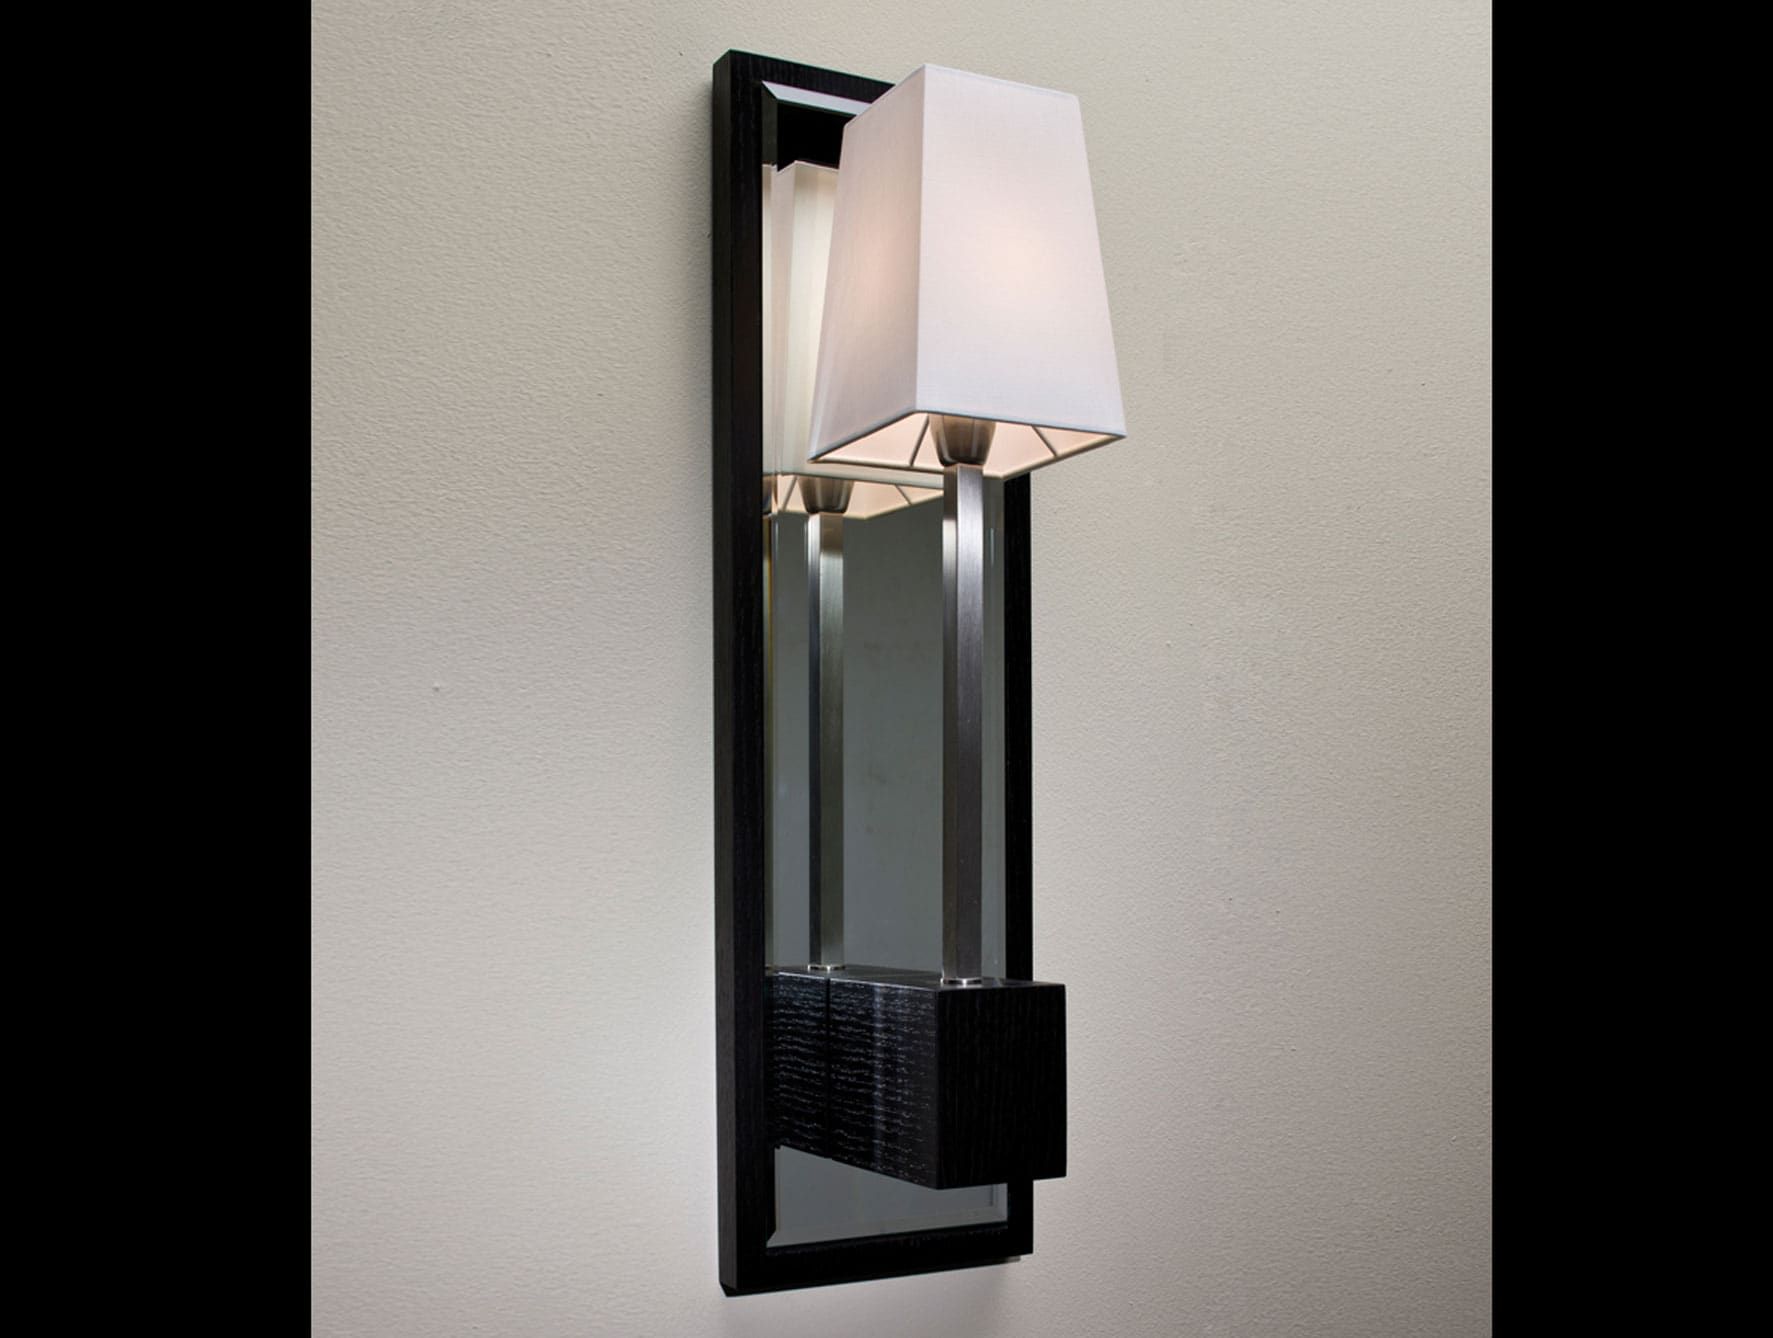 Lala contemporary Italian sconce with black wood